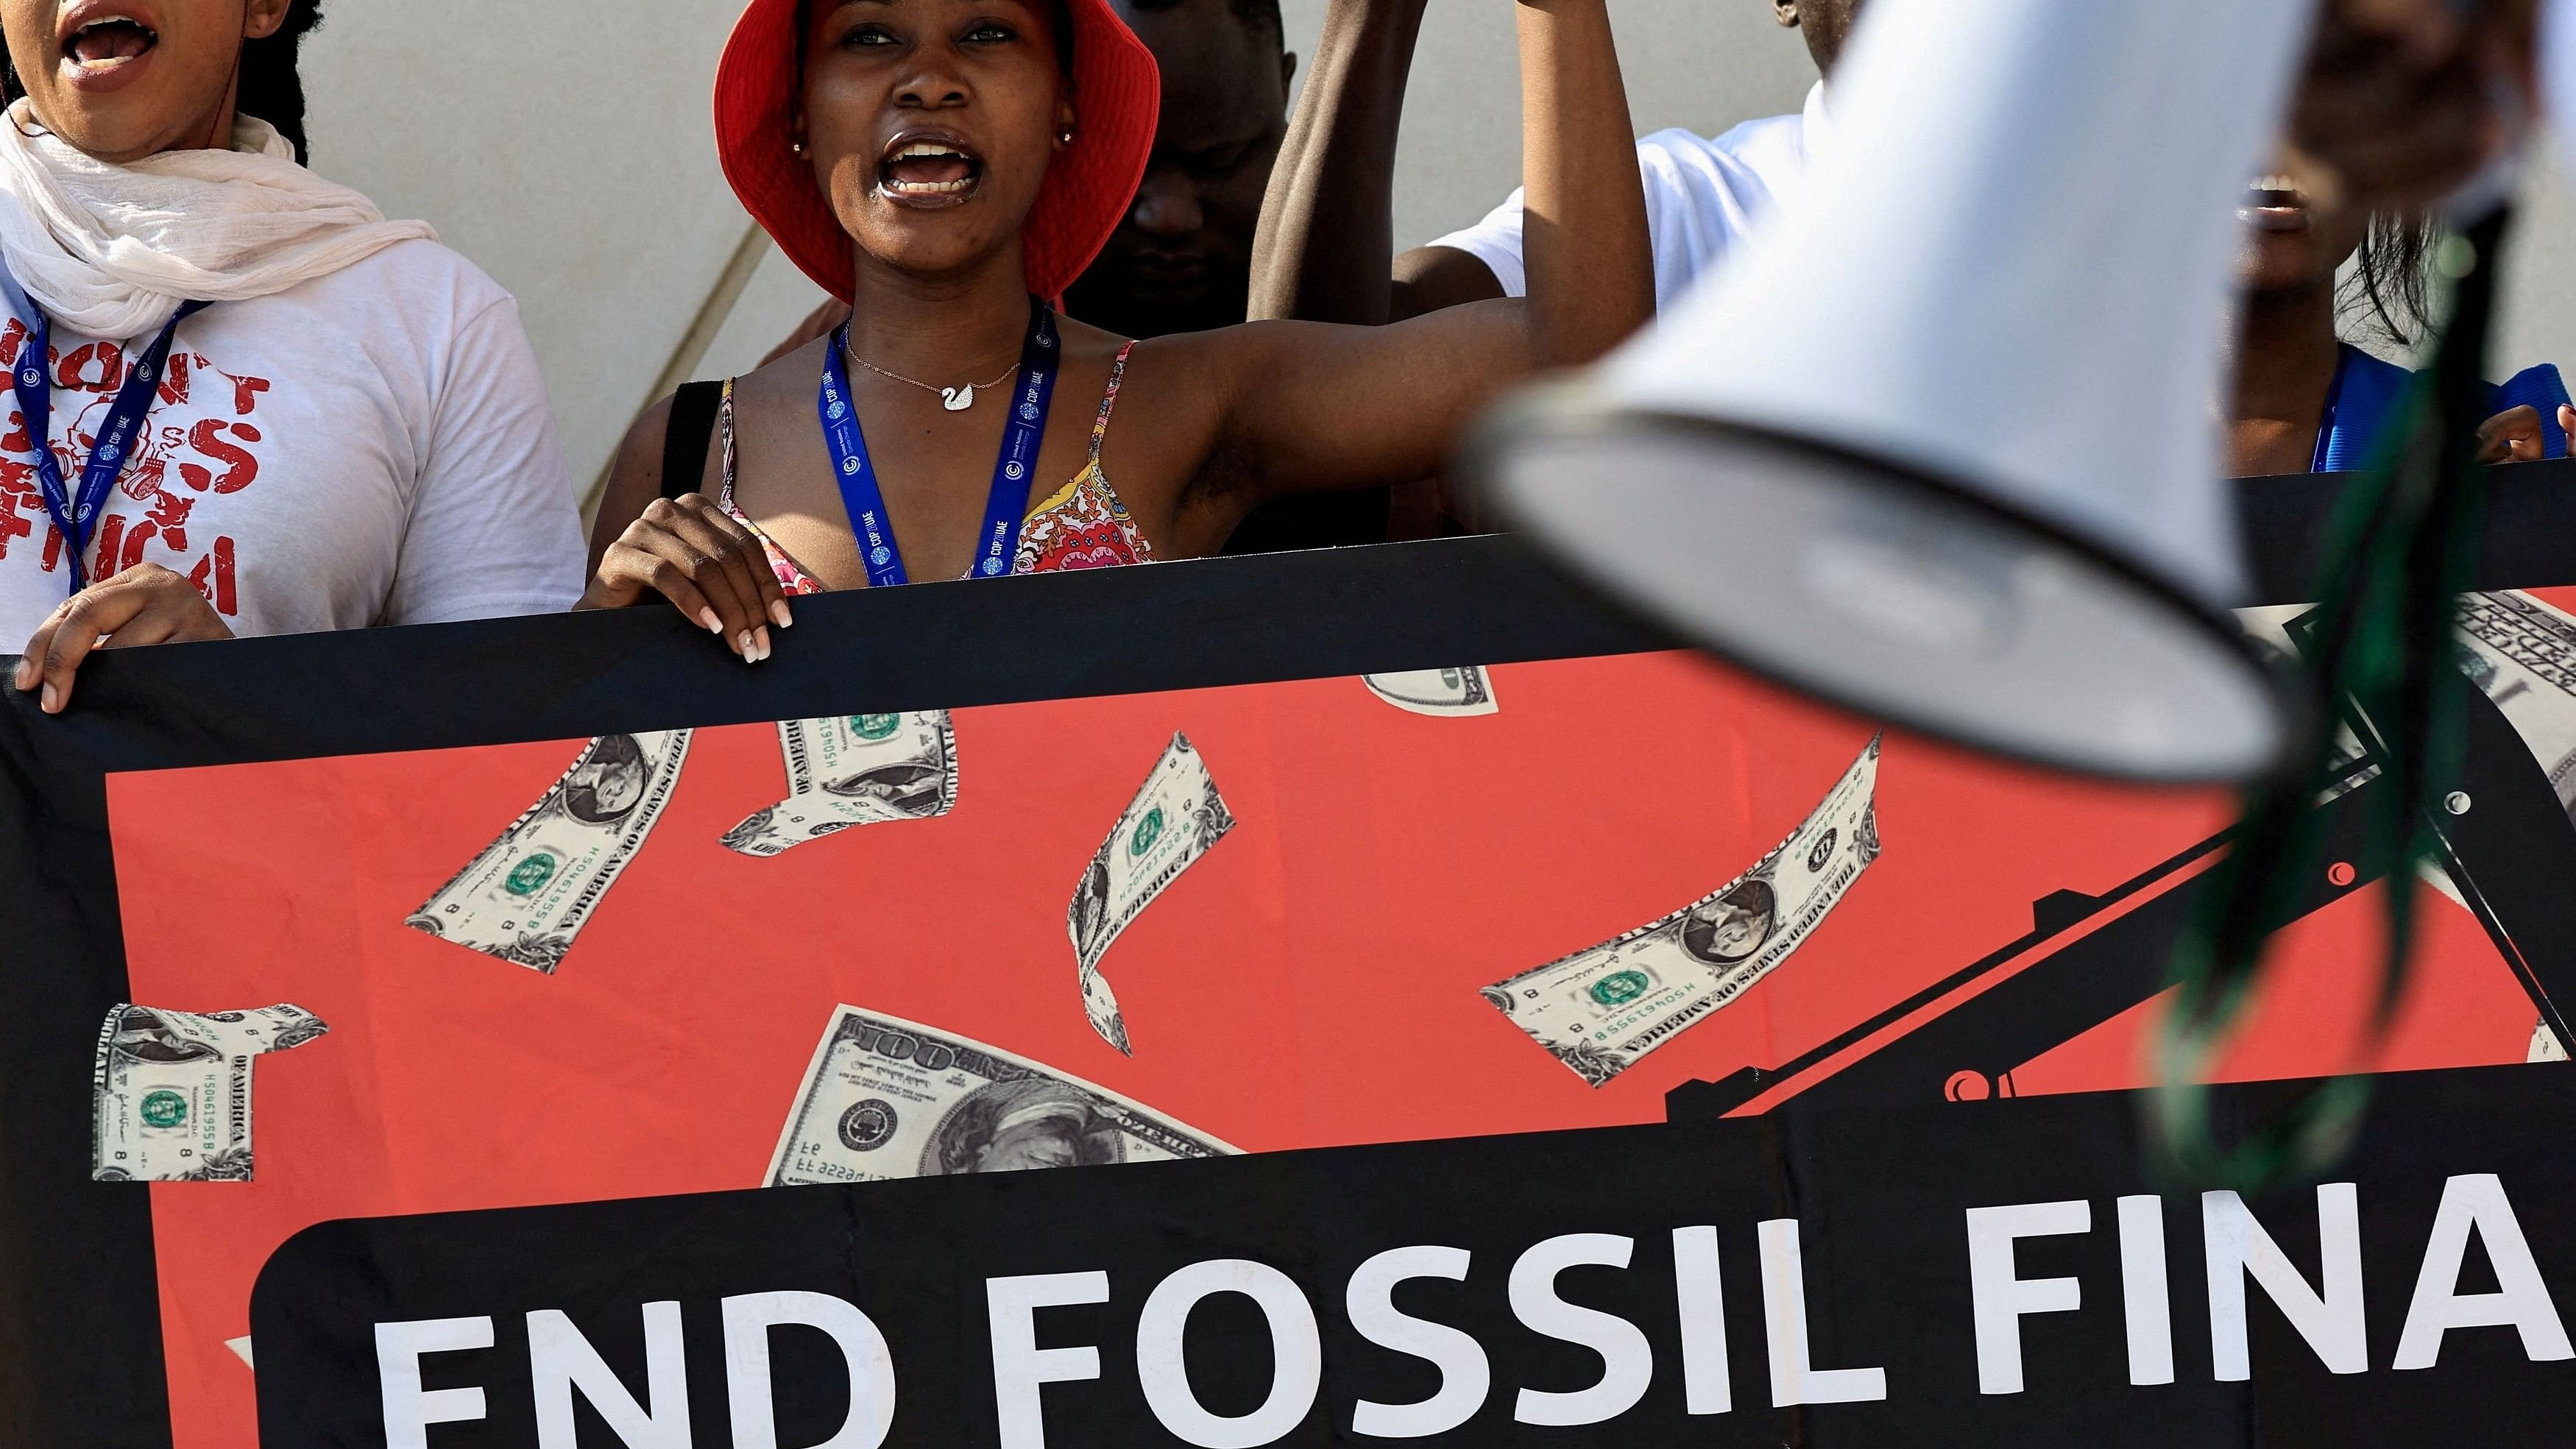 <div class="paragraphs"><p>Activists hold placards and shout slogans during a protest "Kick TotalEnemies Out of Africa" and against fossil fuels at the United Nations Climate Change Conference  in Dubai, United Arab Emirates.</p></div>